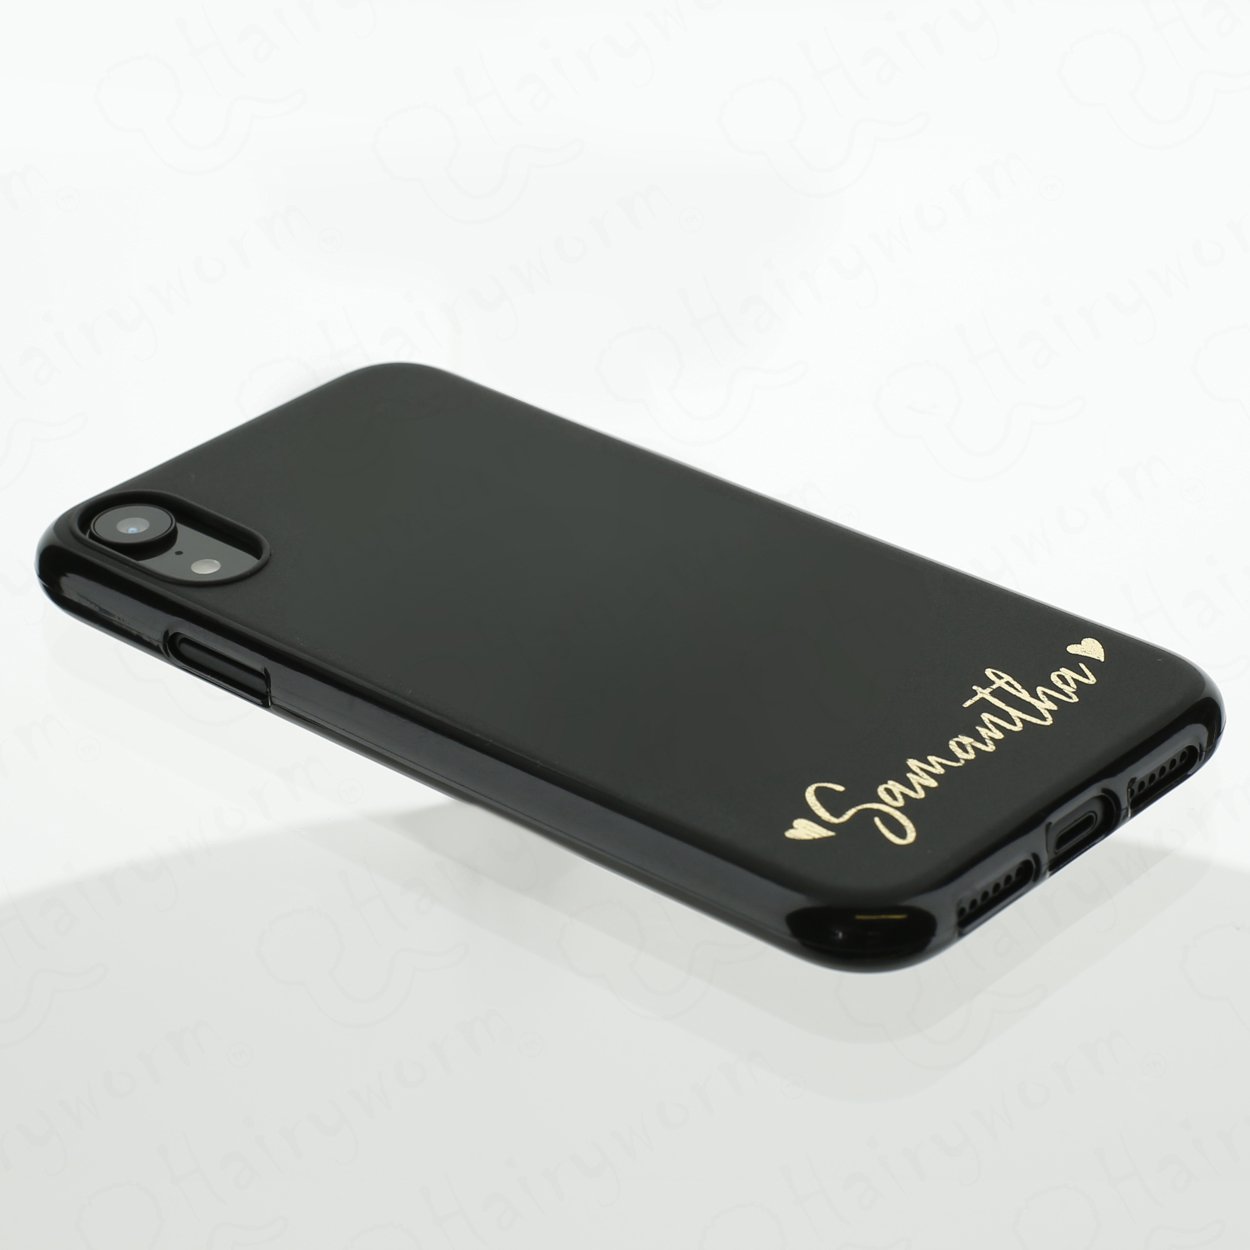 Personalised Sony Phone Gel Case with White Block Initials and Heart